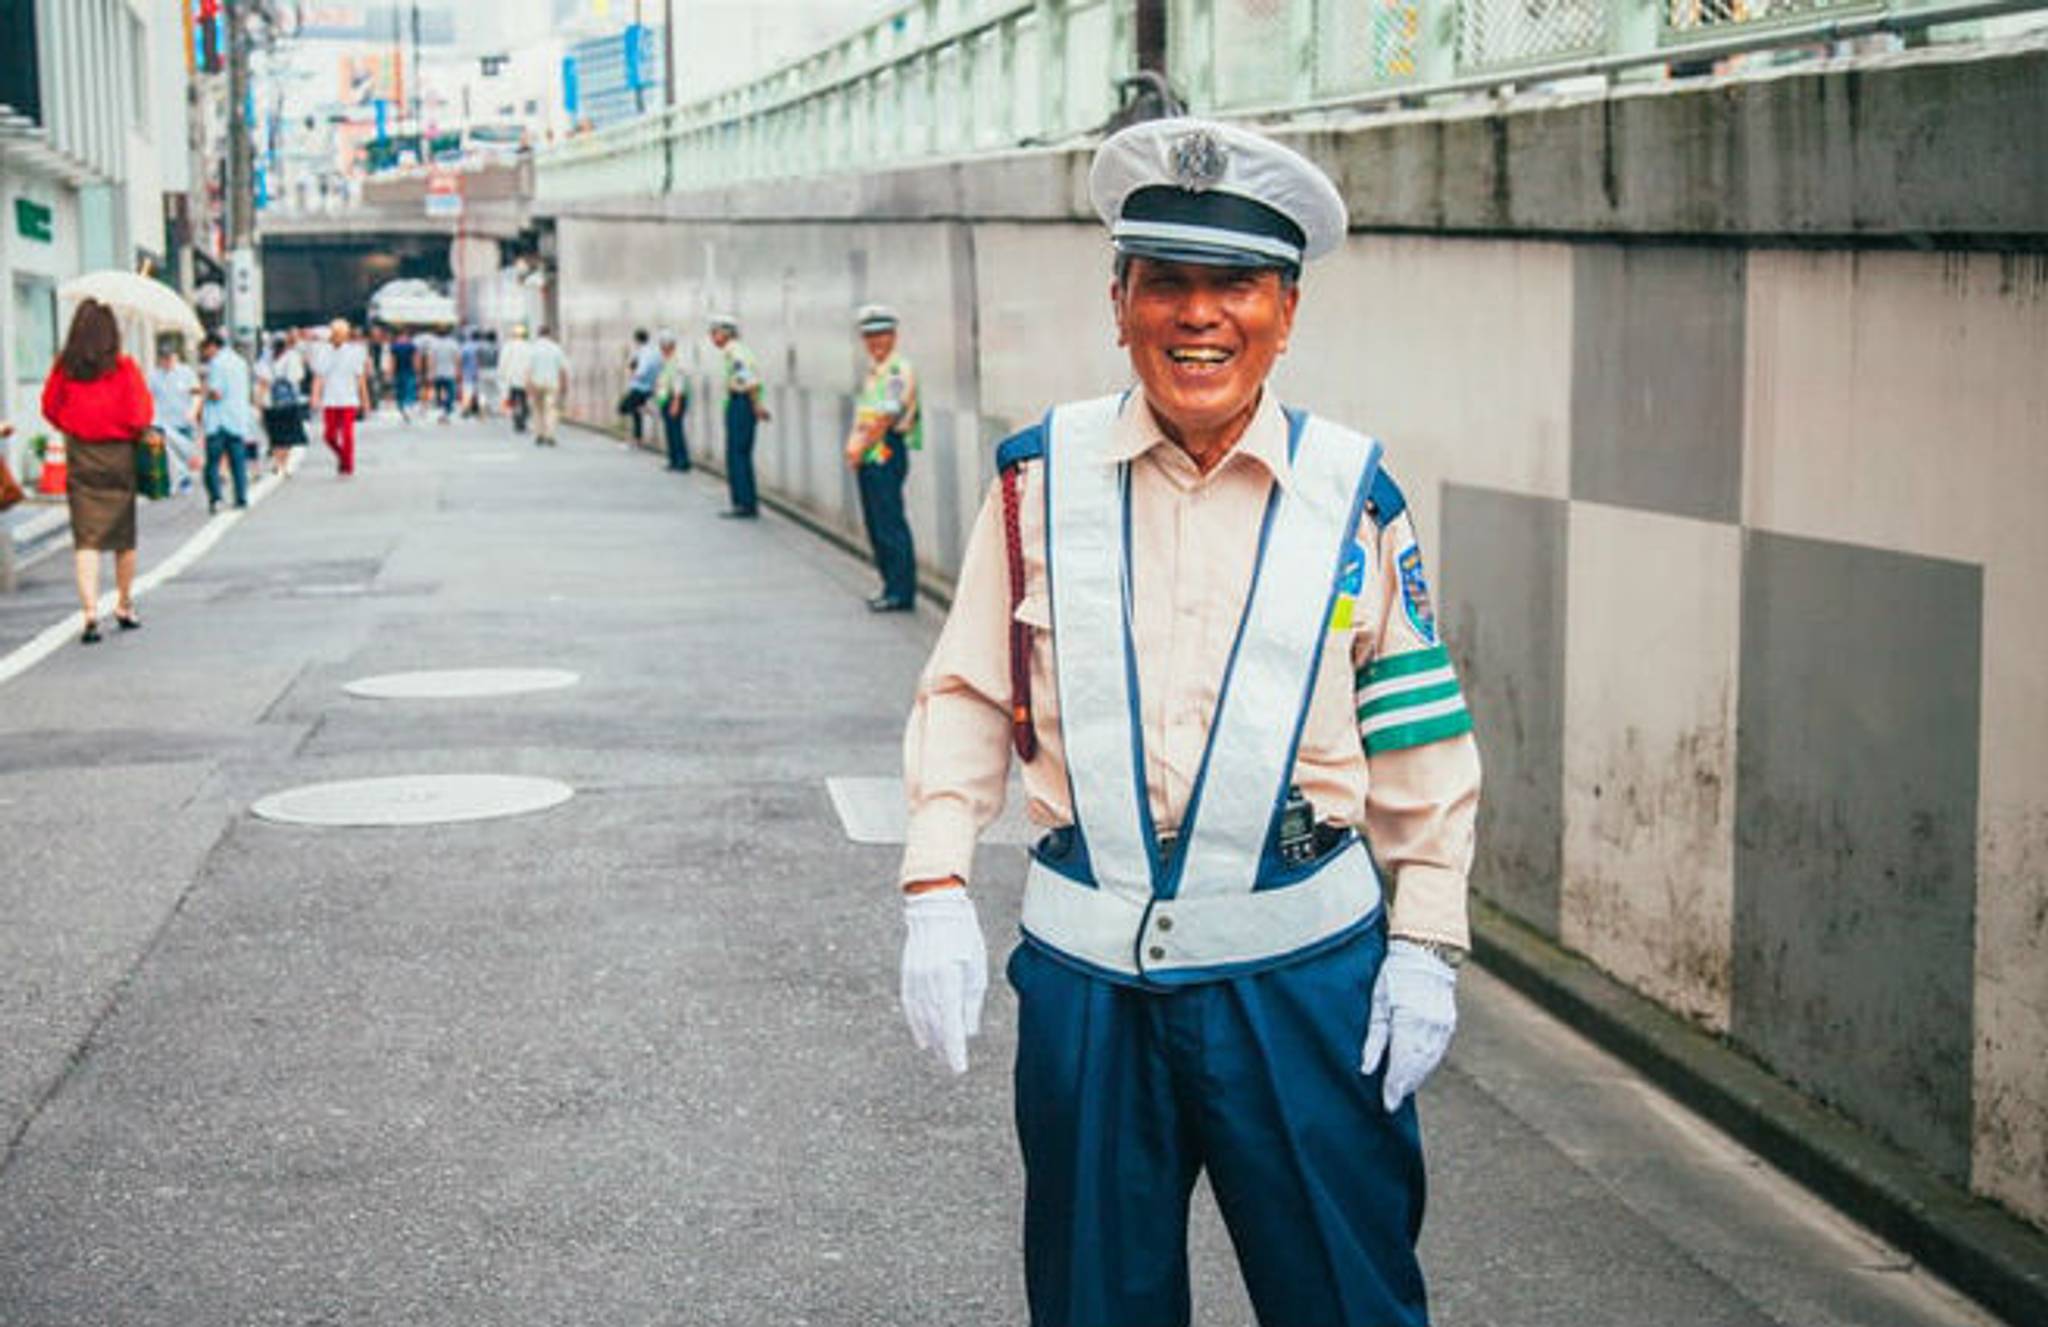 Older people in Japan embrace tech to stay active